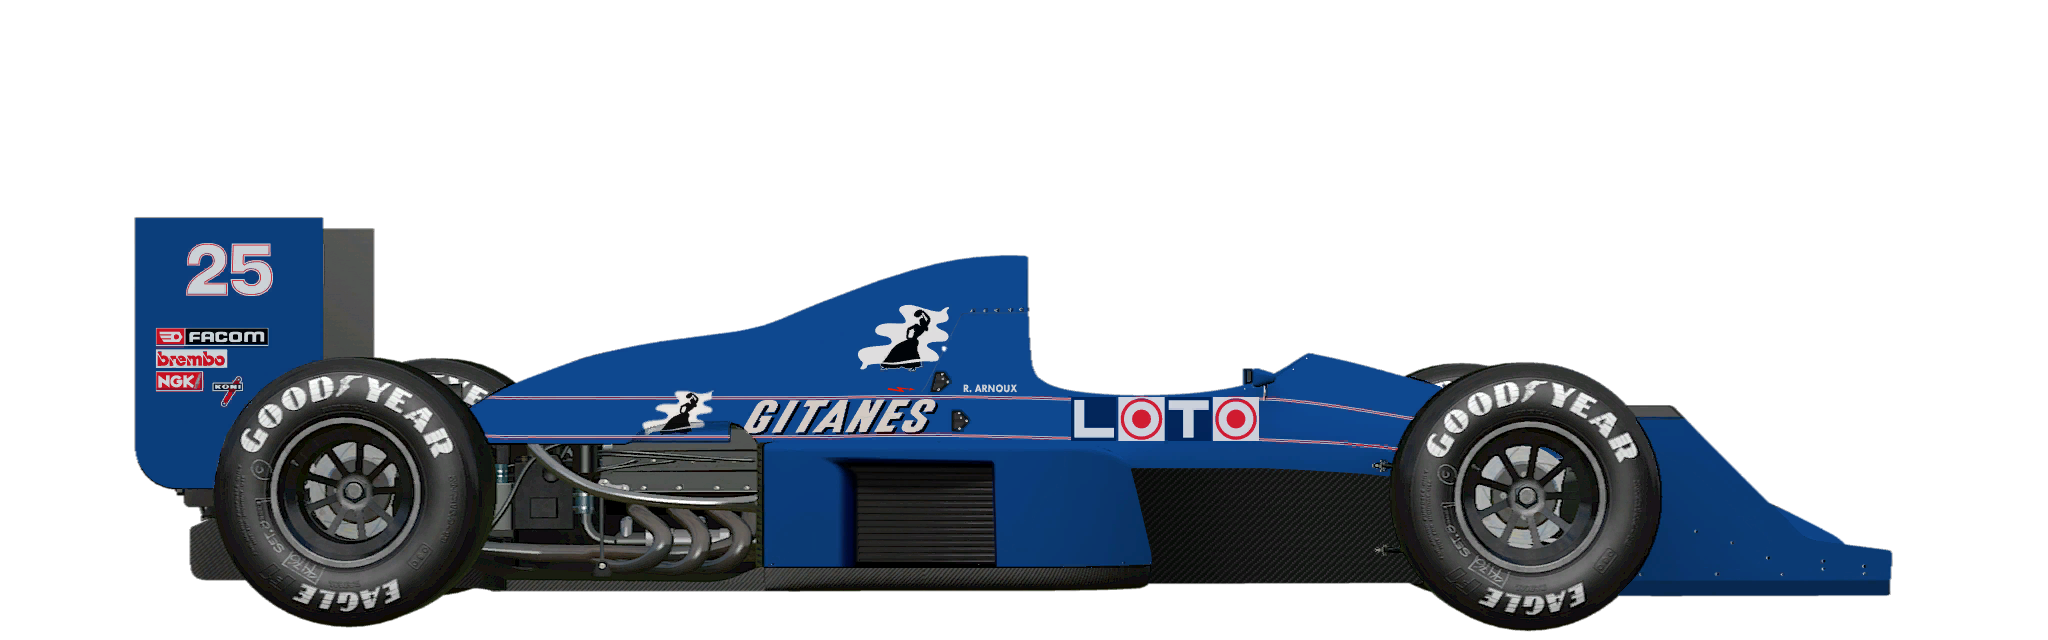 preview-ligier25.png